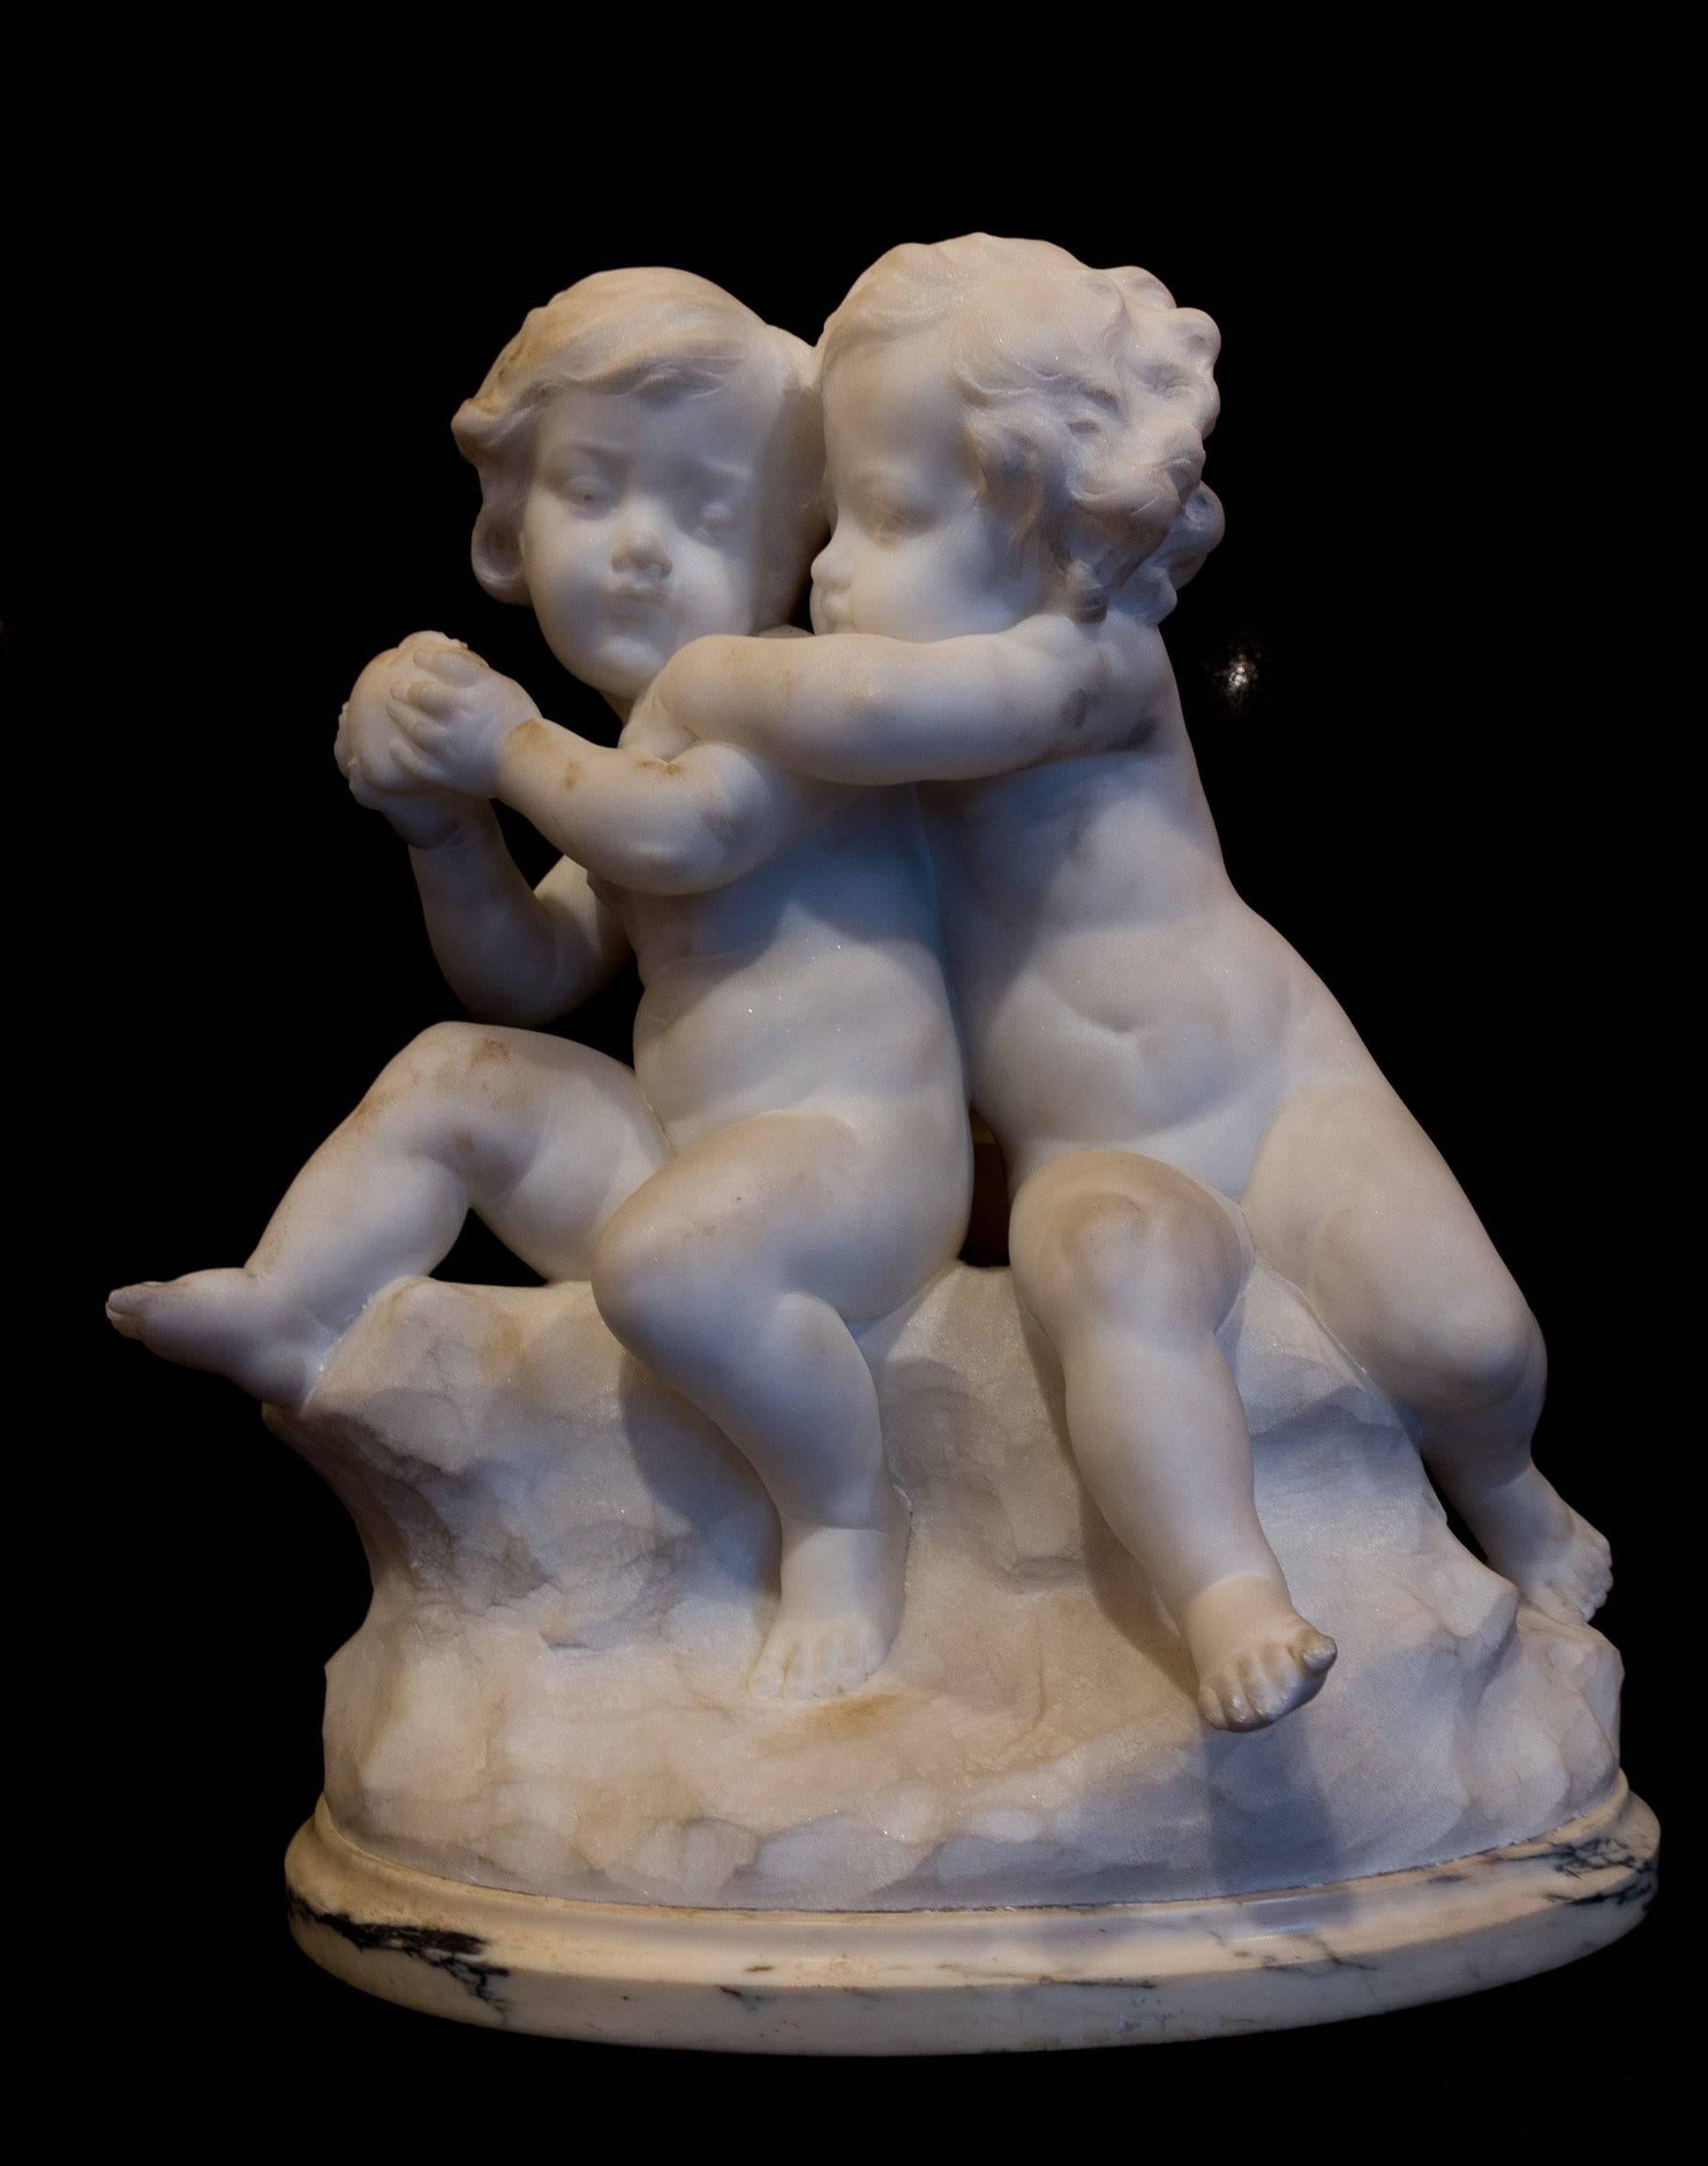 We are pleased to present a lovely marble sculpture signed by Guglielmo Pugi. It depicts 